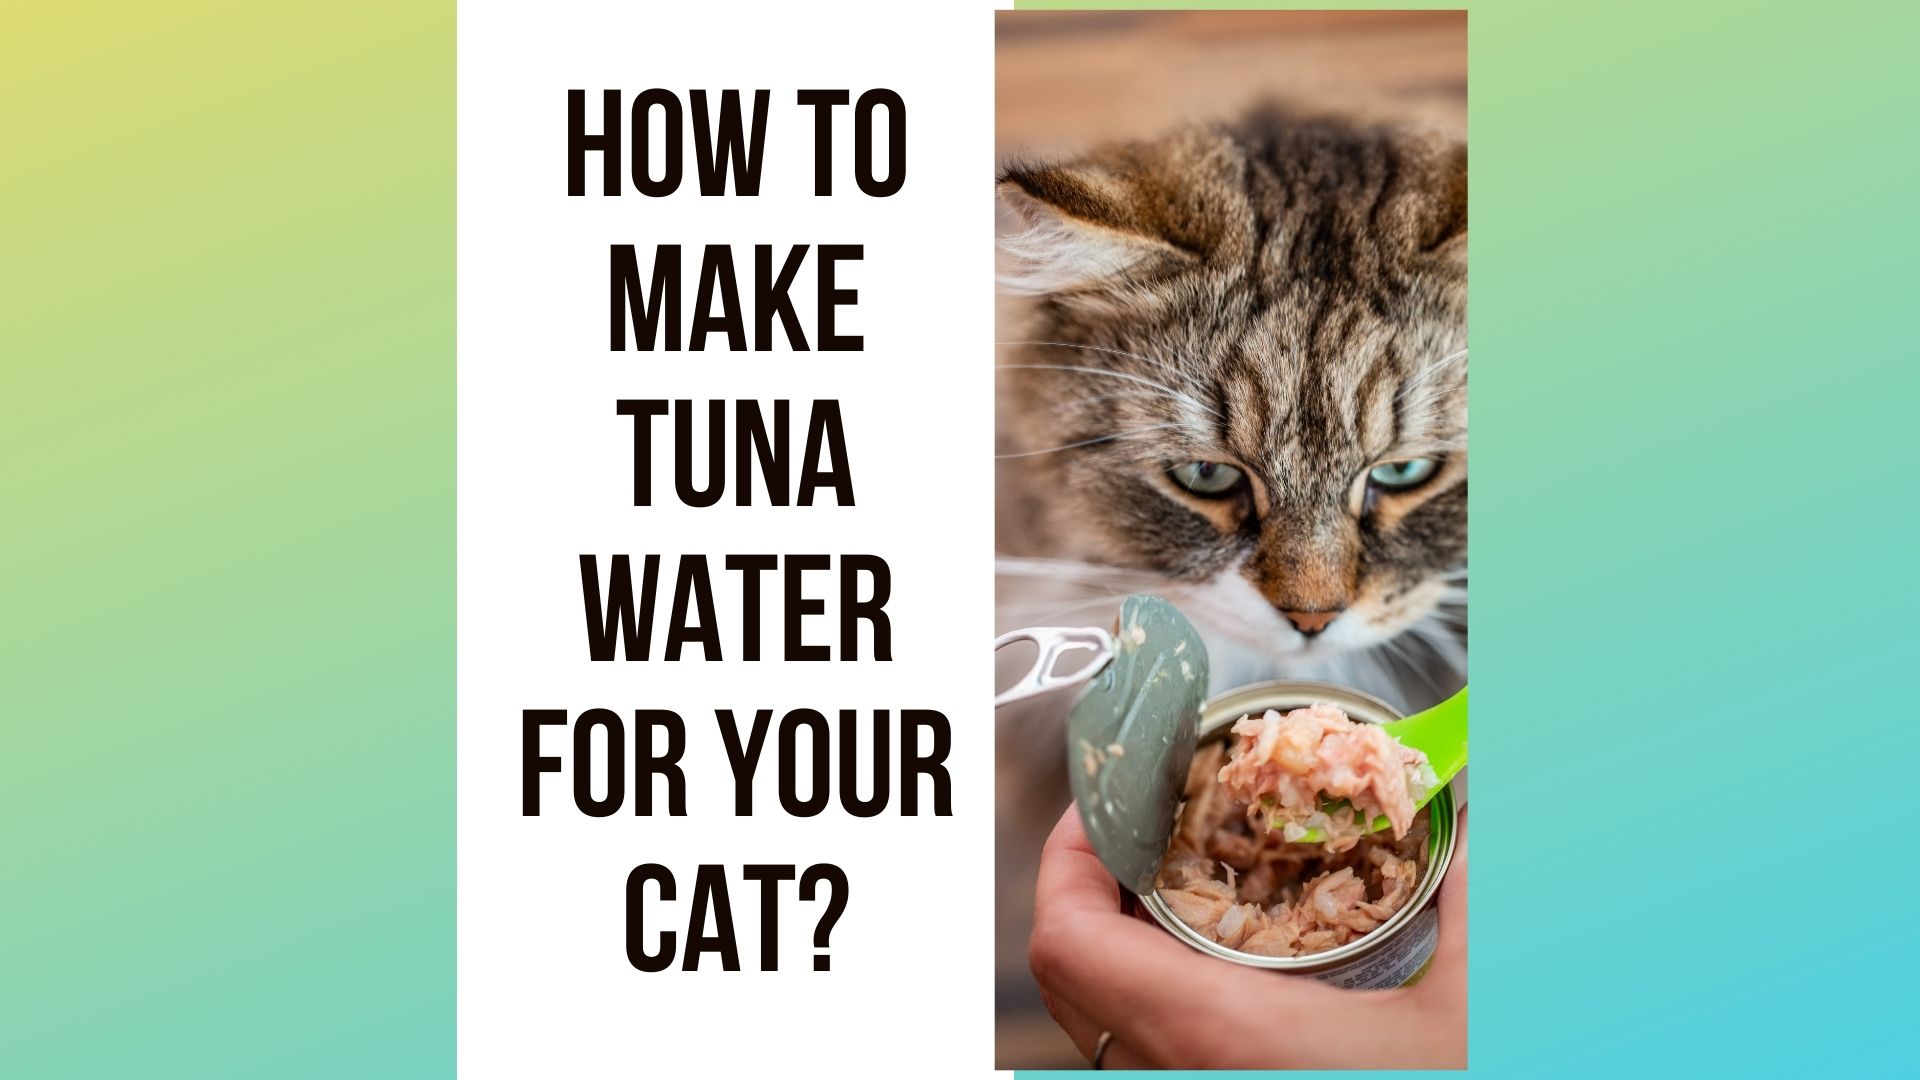 How to Make Tuna Water for Your Cat